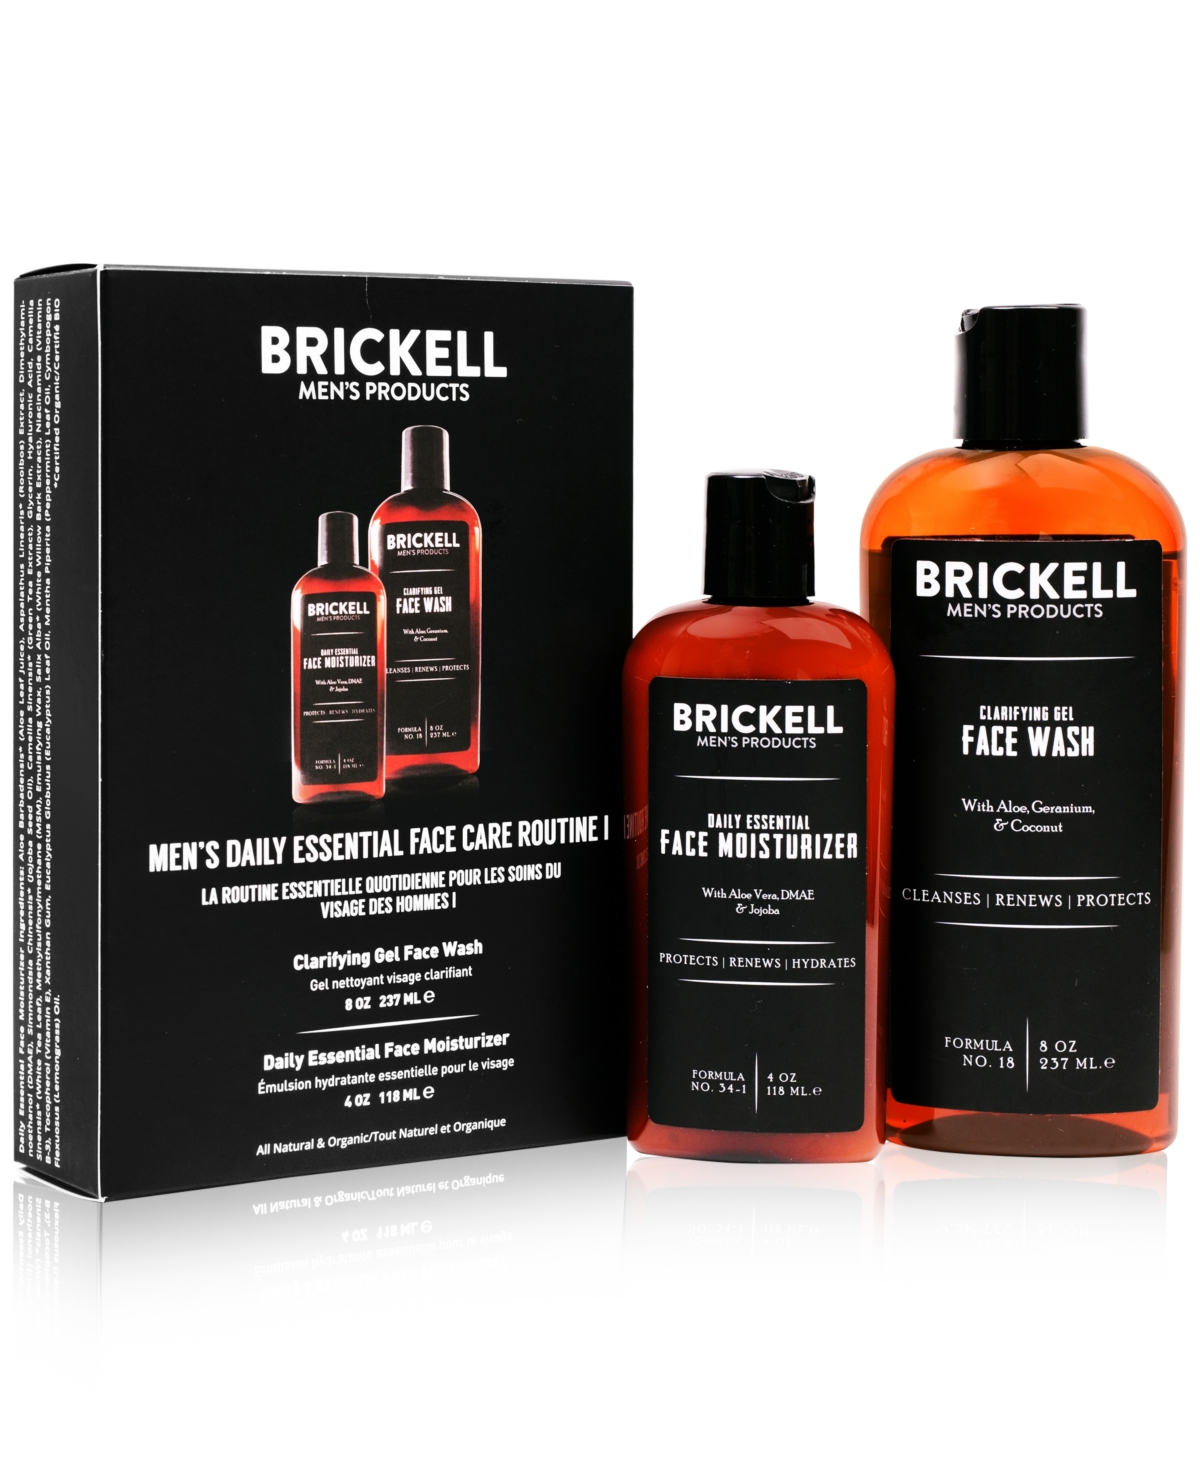 Brickell Mens Products Brickell Men's Products 2-pc. Men's Daily Essential Face Care Set In No Color